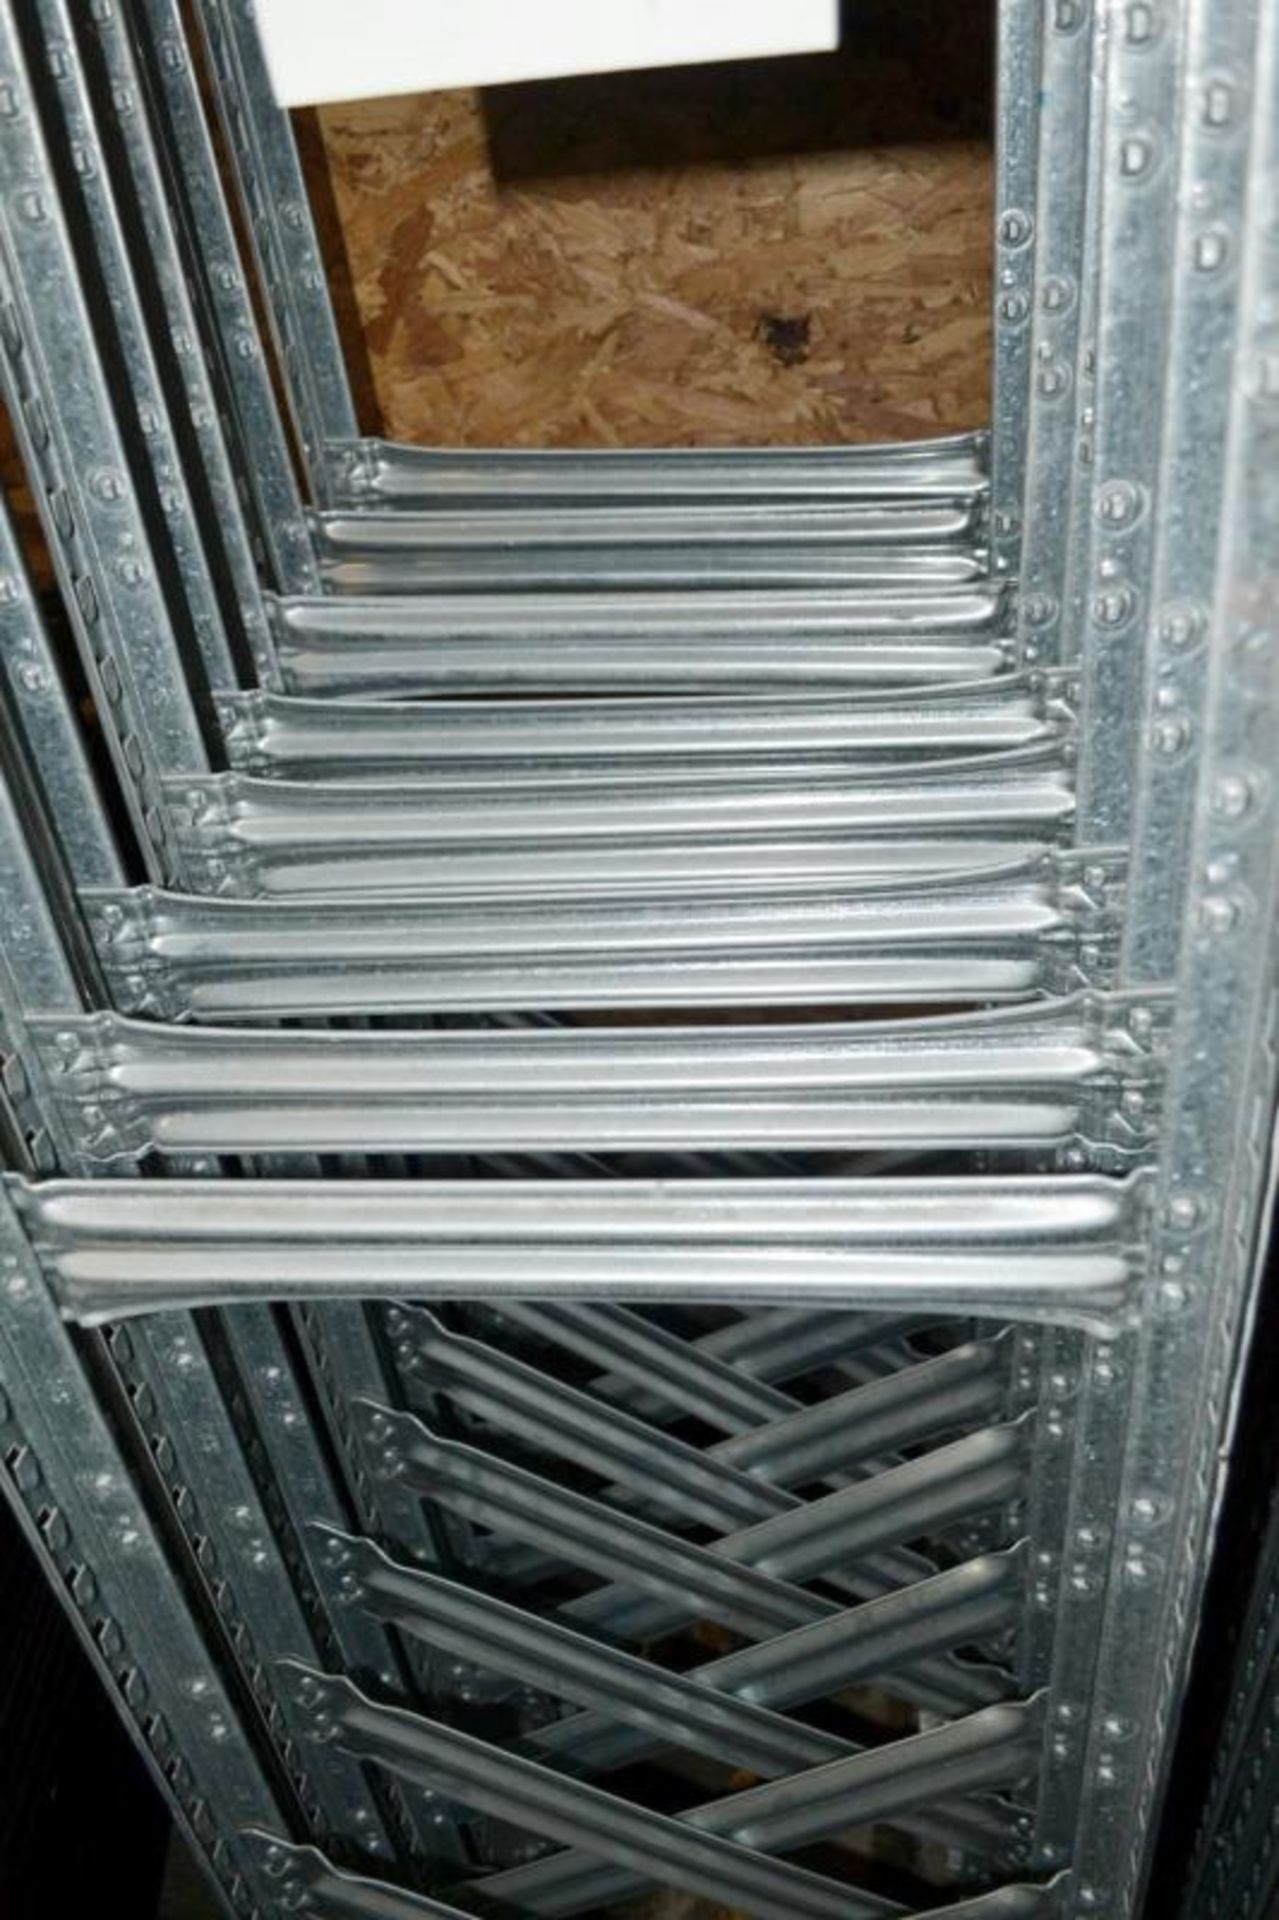 4 x Bays of Metalsistem Steel Modular Storage Shelving - Includes 37 Pieces - Recently Removed - Image 7 of 17